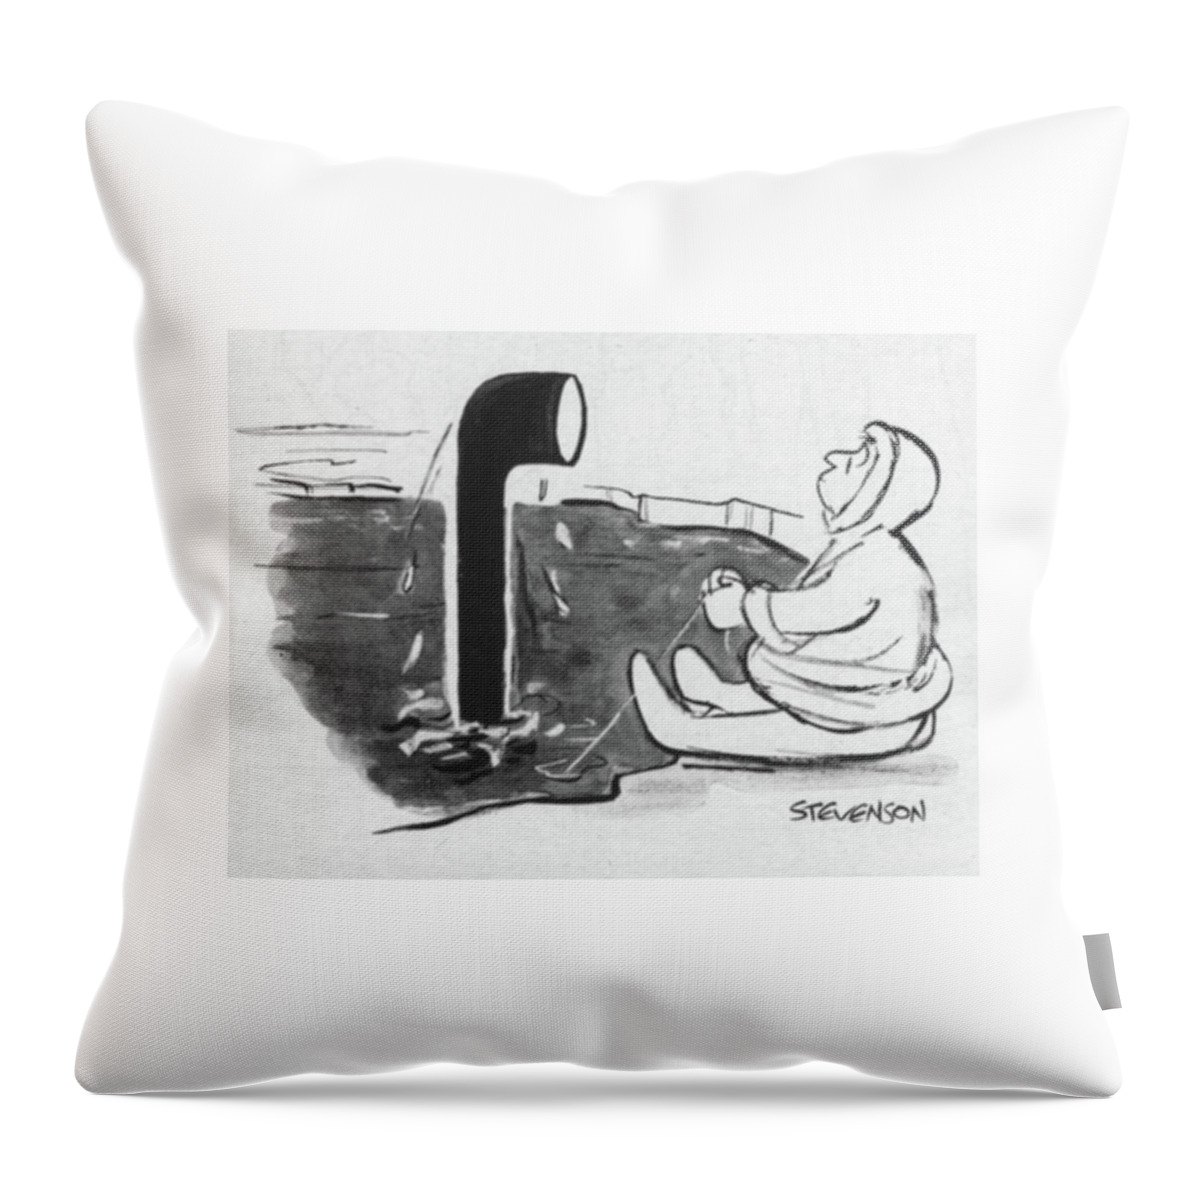 New Yorker August 30th, 1958 Throw Pillow